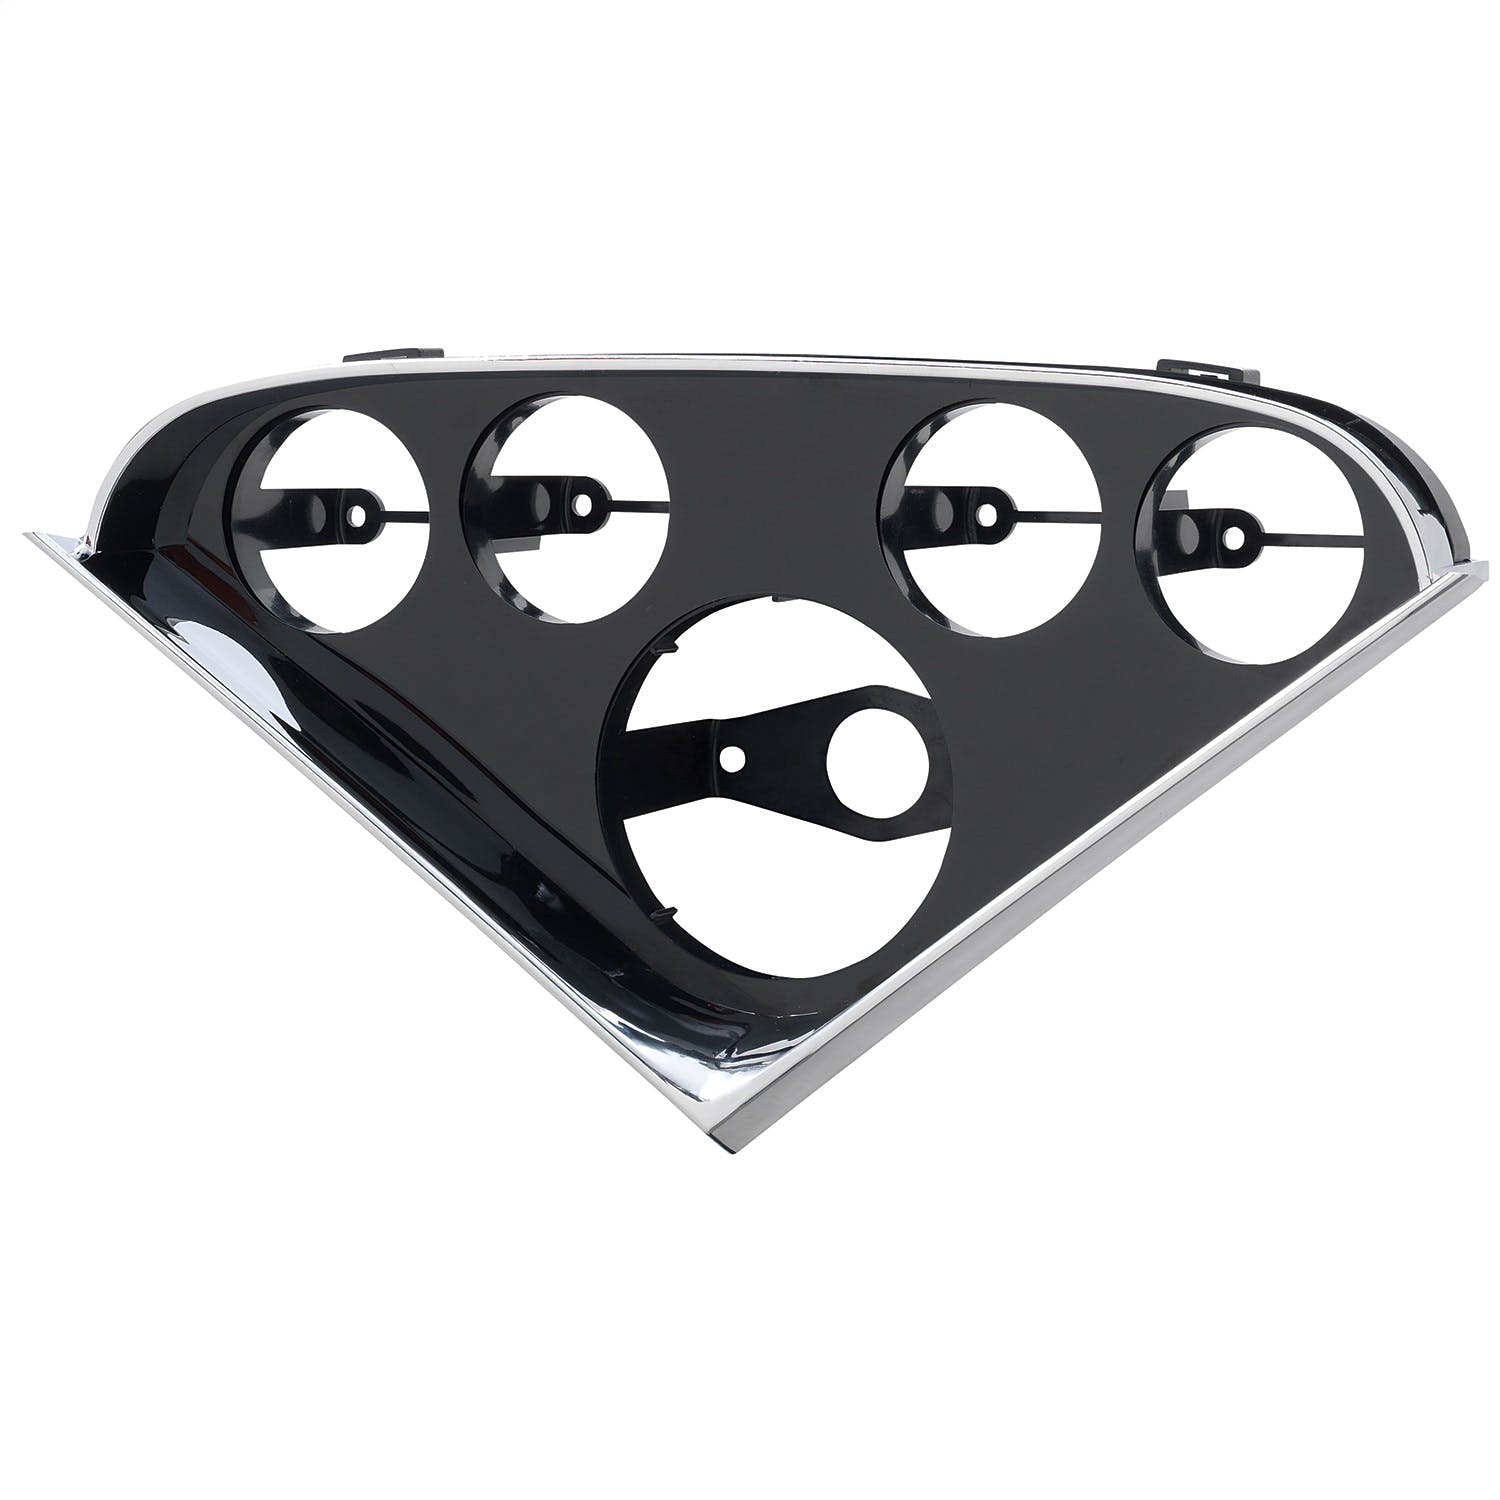 AutoMeter Products 2208 Mounting Solutions 5 Gauge Panel 3 3/8 in. Tach/Speedo 2 1/16in. Chrome